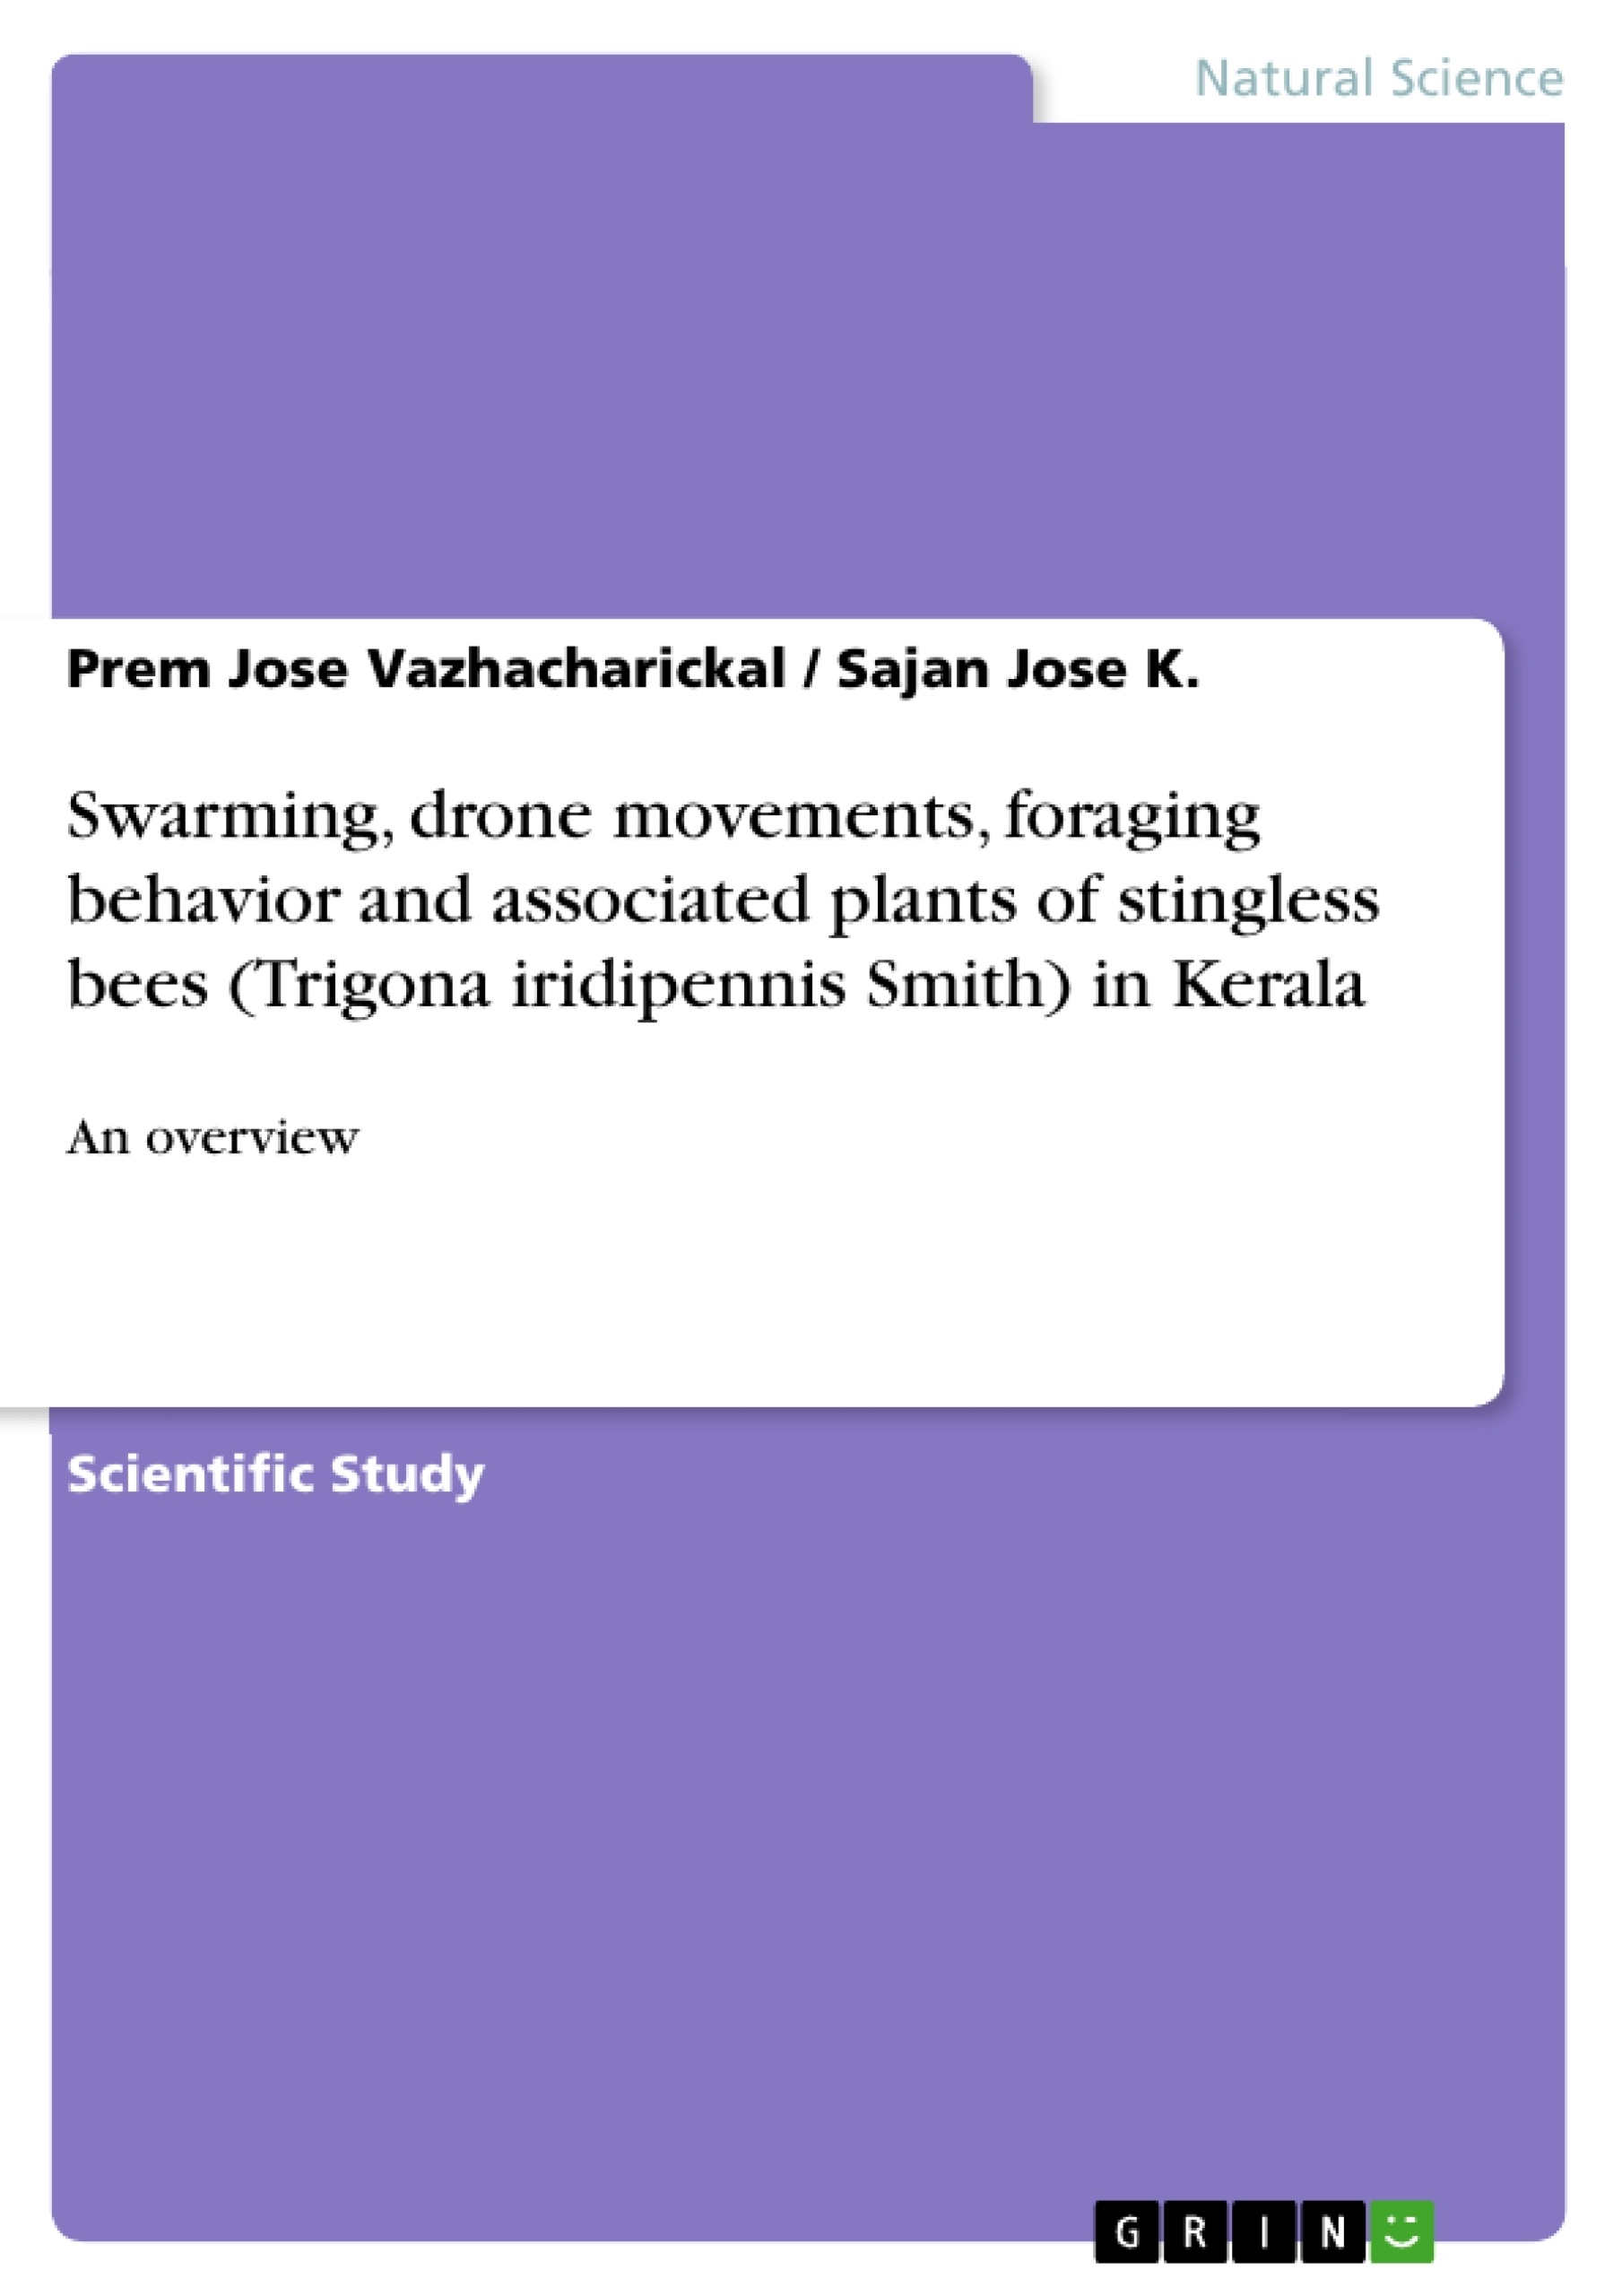 Titre: Swarming, drone movements, foraging behavior and associated plants of stingless bees (Trigona iridipennis Smith) in Kerala